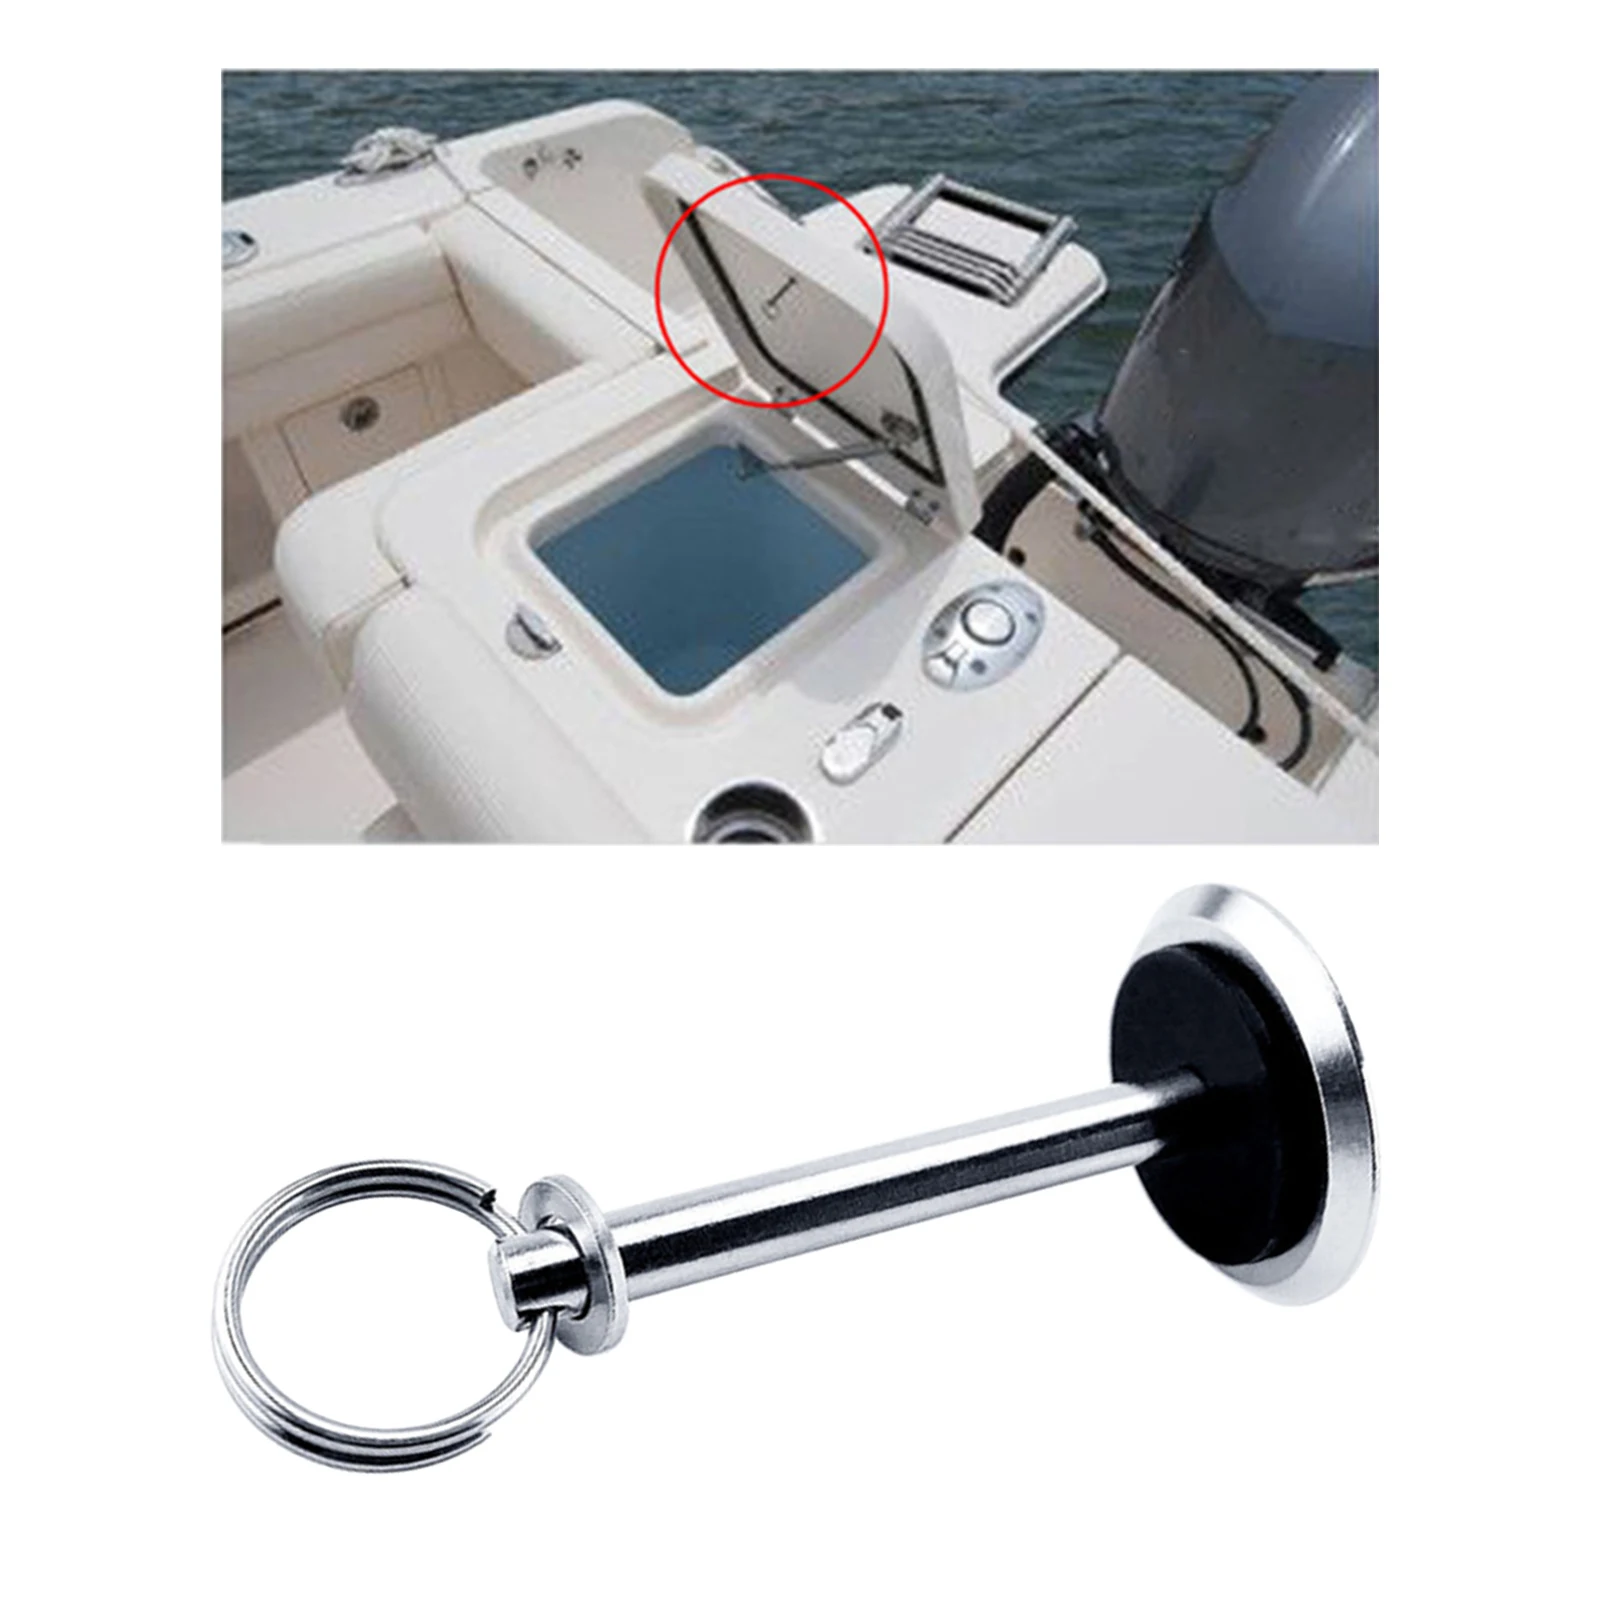 Hatch Cover Pull Handle Stainless Steel Lid for Boat Fishing Engine Cover